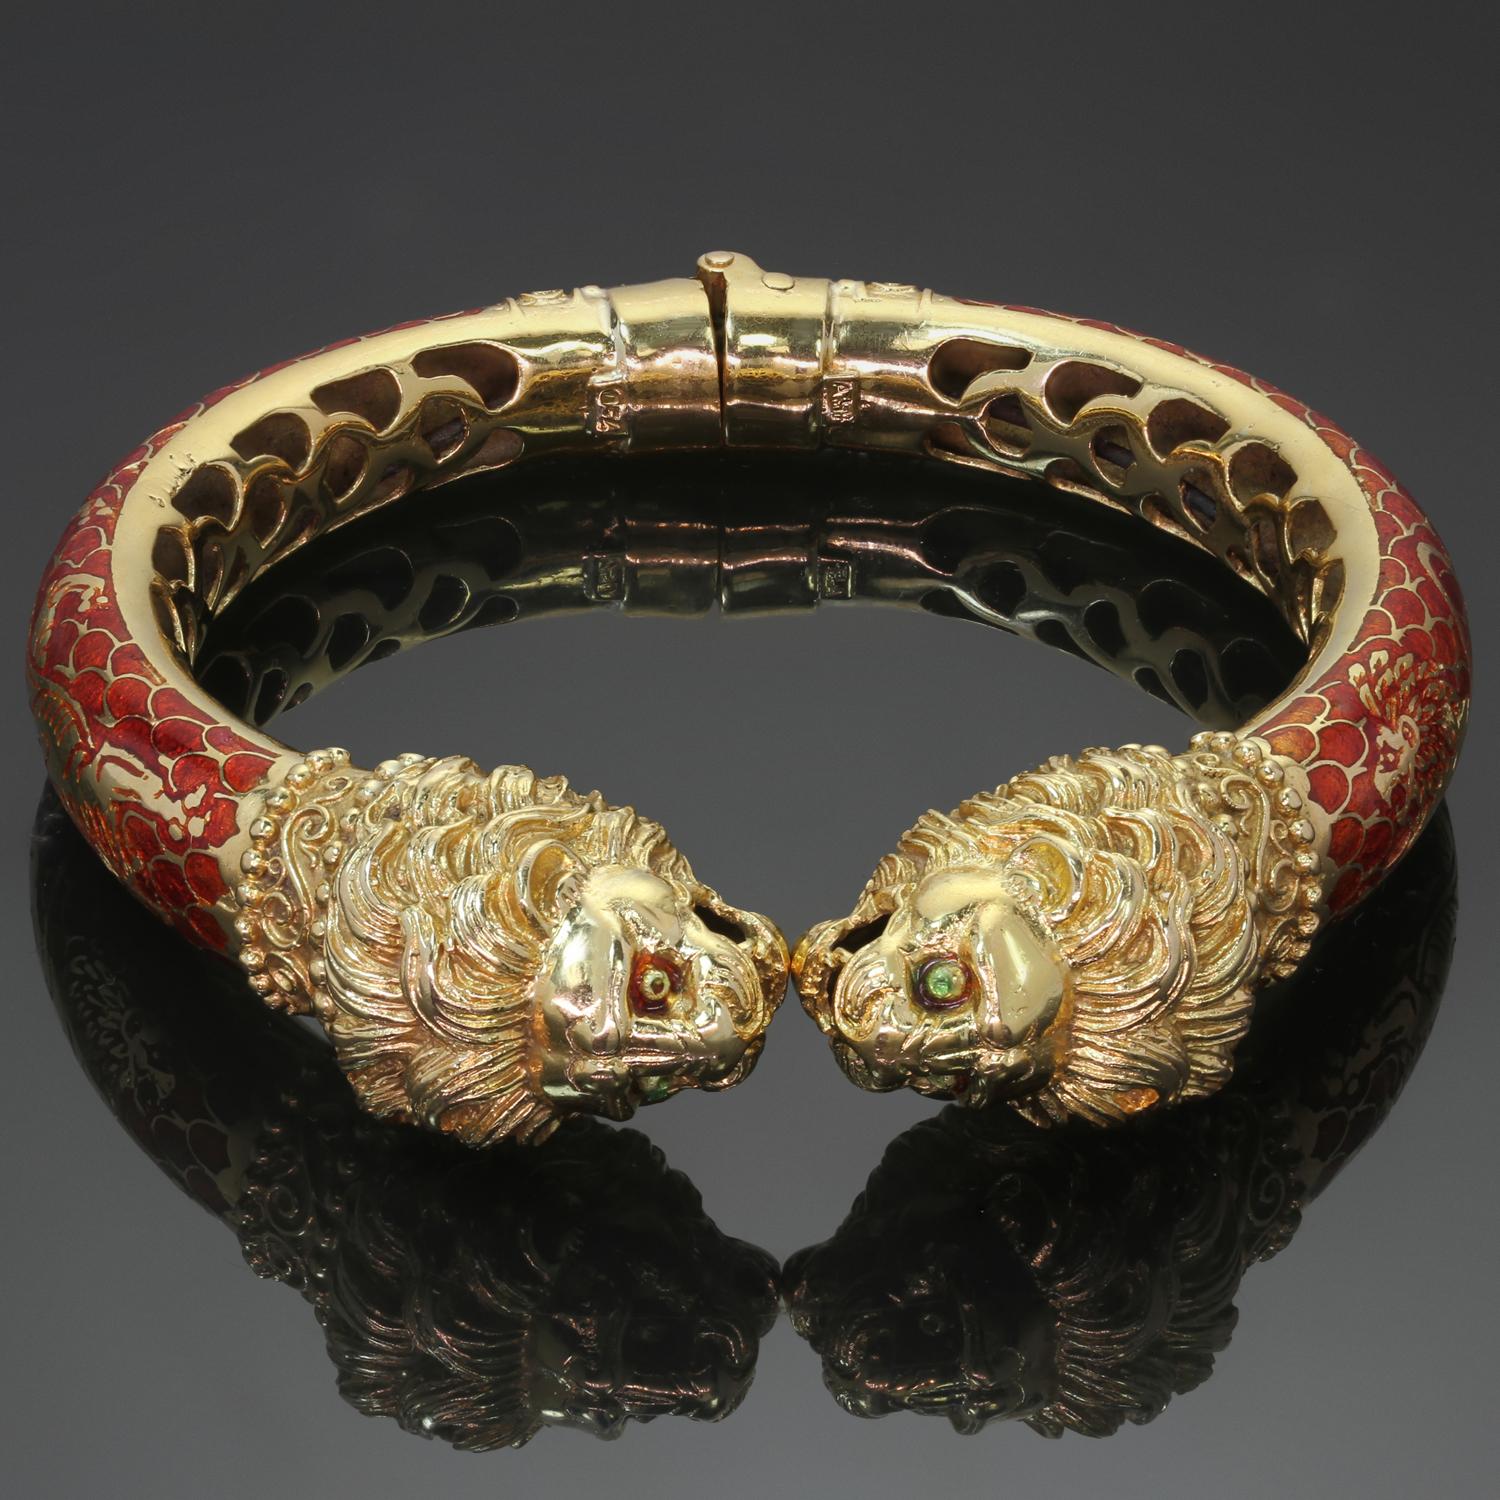 This gorgeous vintage bracelet features a double-headed chimera design intricately crafted in 18k yellow gold and red enamel and accented with gorgeous gold leaping lions on both sides of the bangle. Makers Mark A.5F.  Made in Greece circa 1980s.